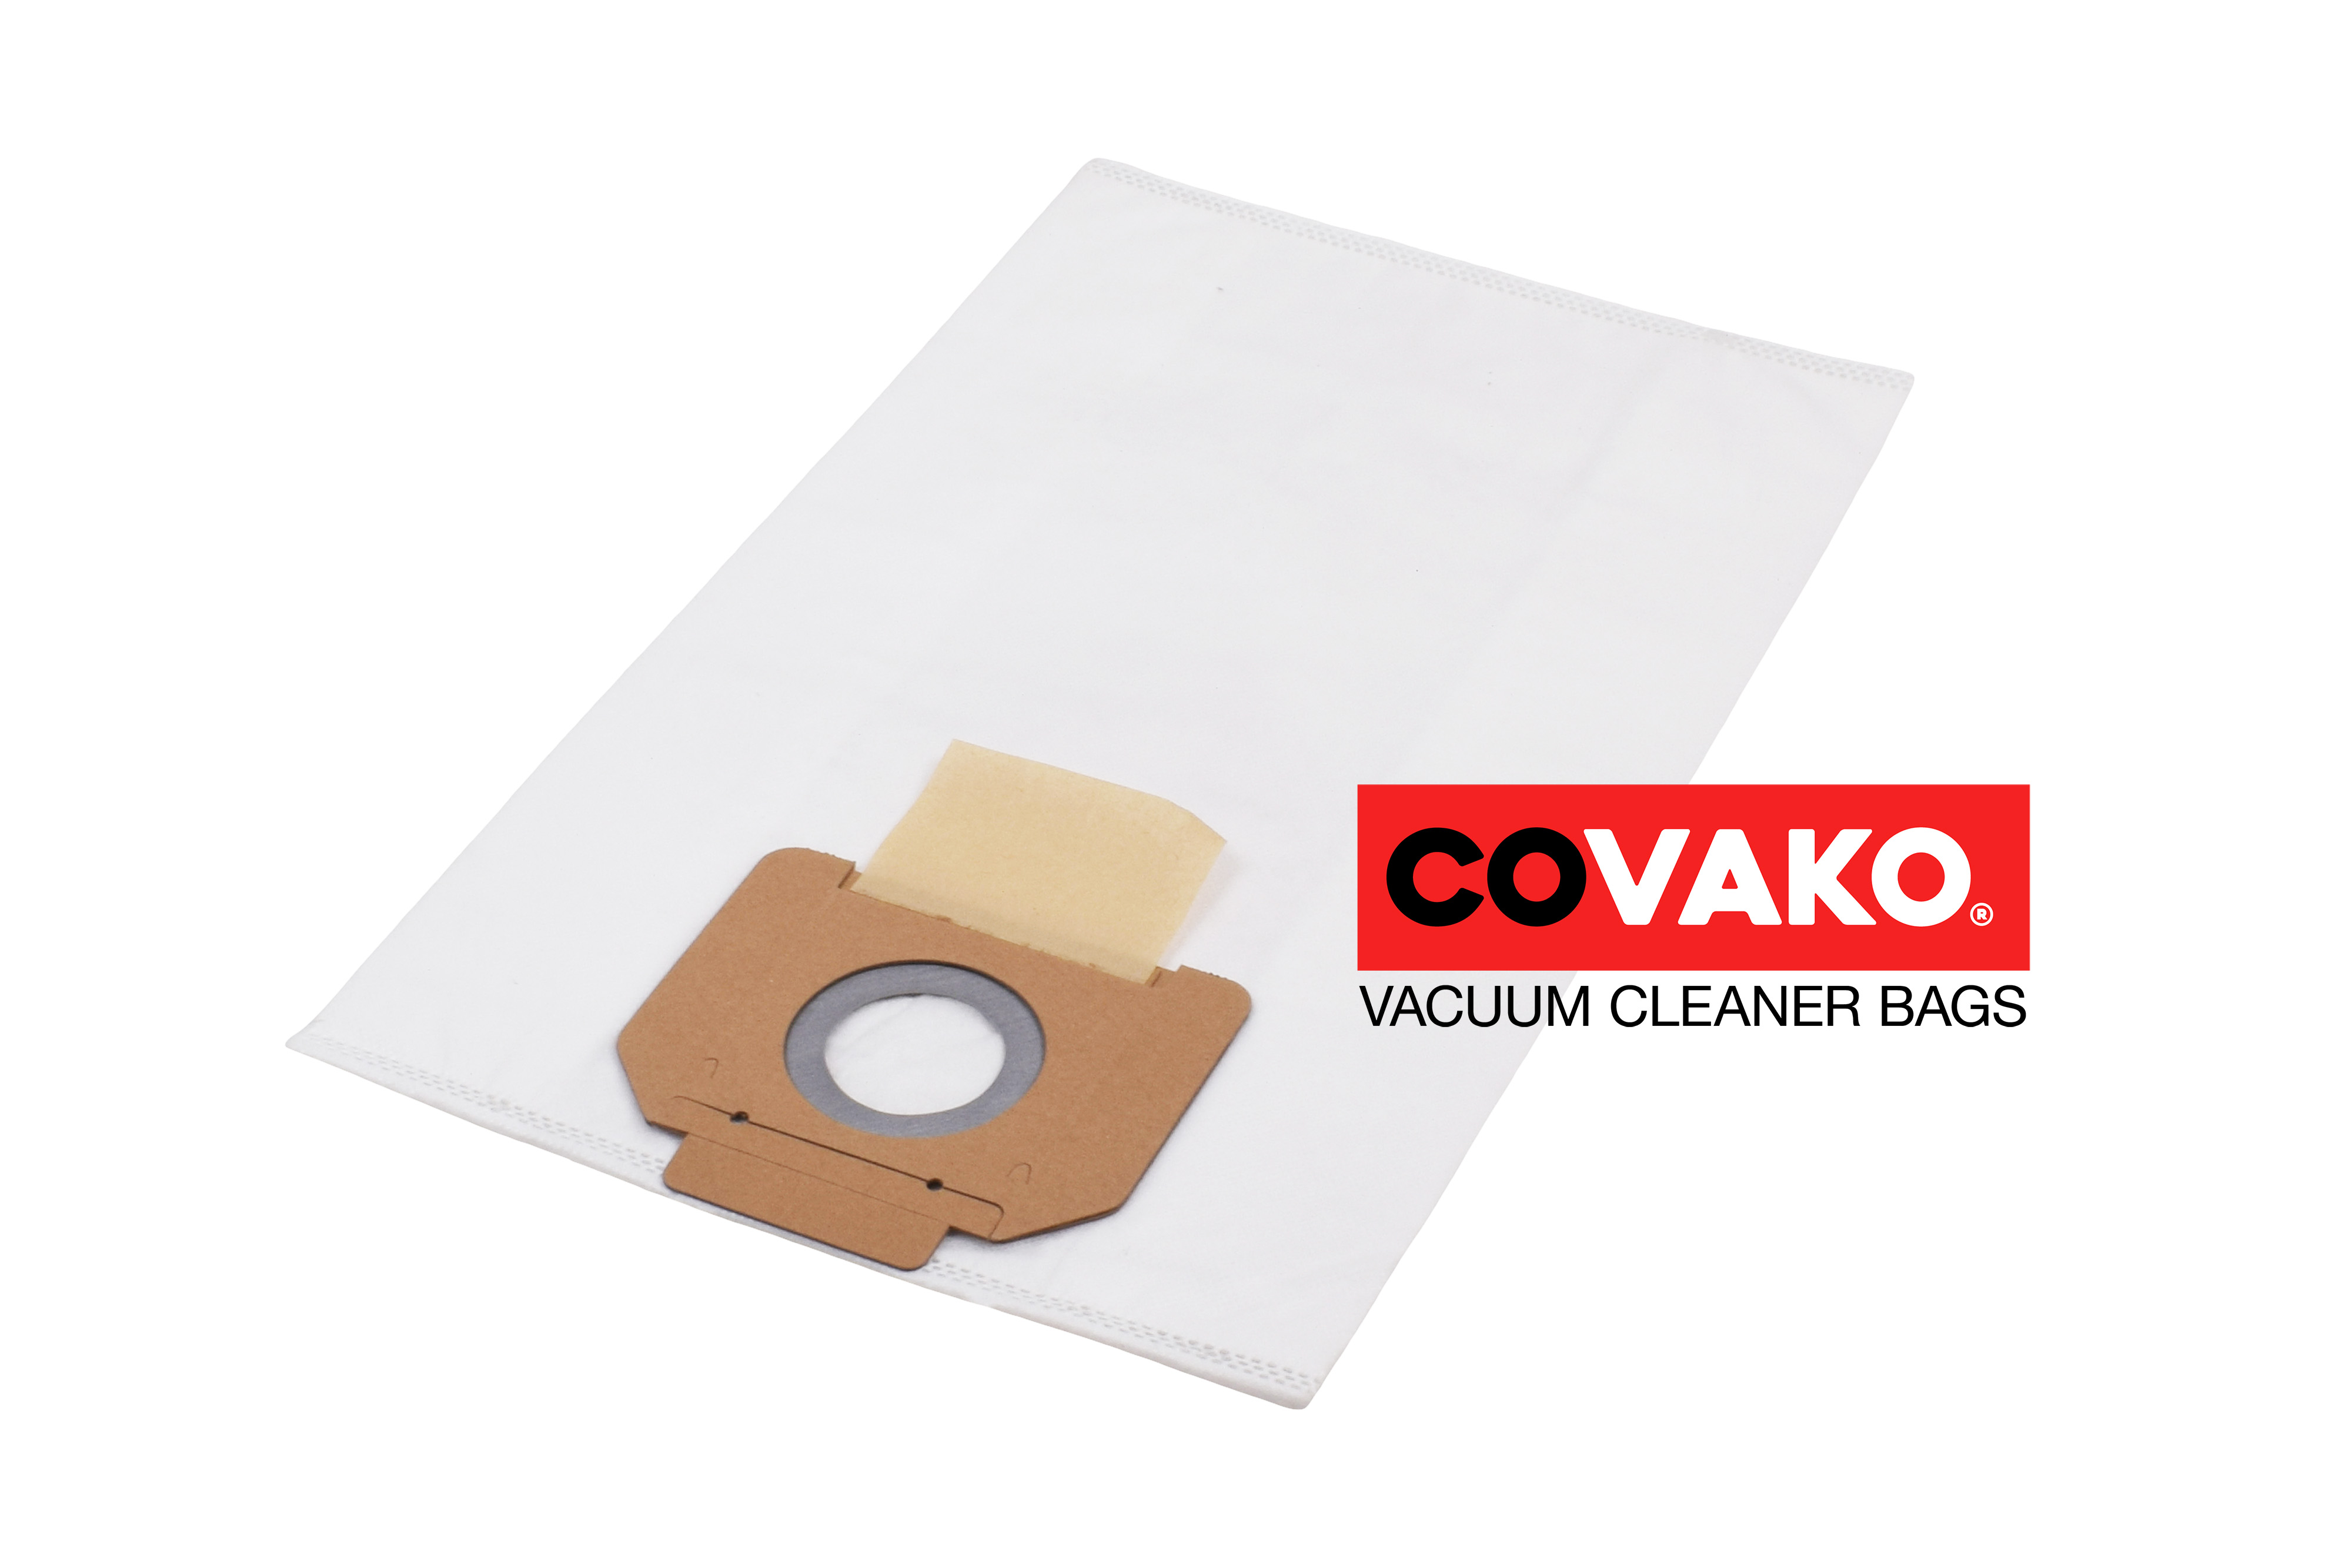 Cleancraft dryCat 133 IRSCM / Synthesis - Cleancraft vacuum cleaner bags